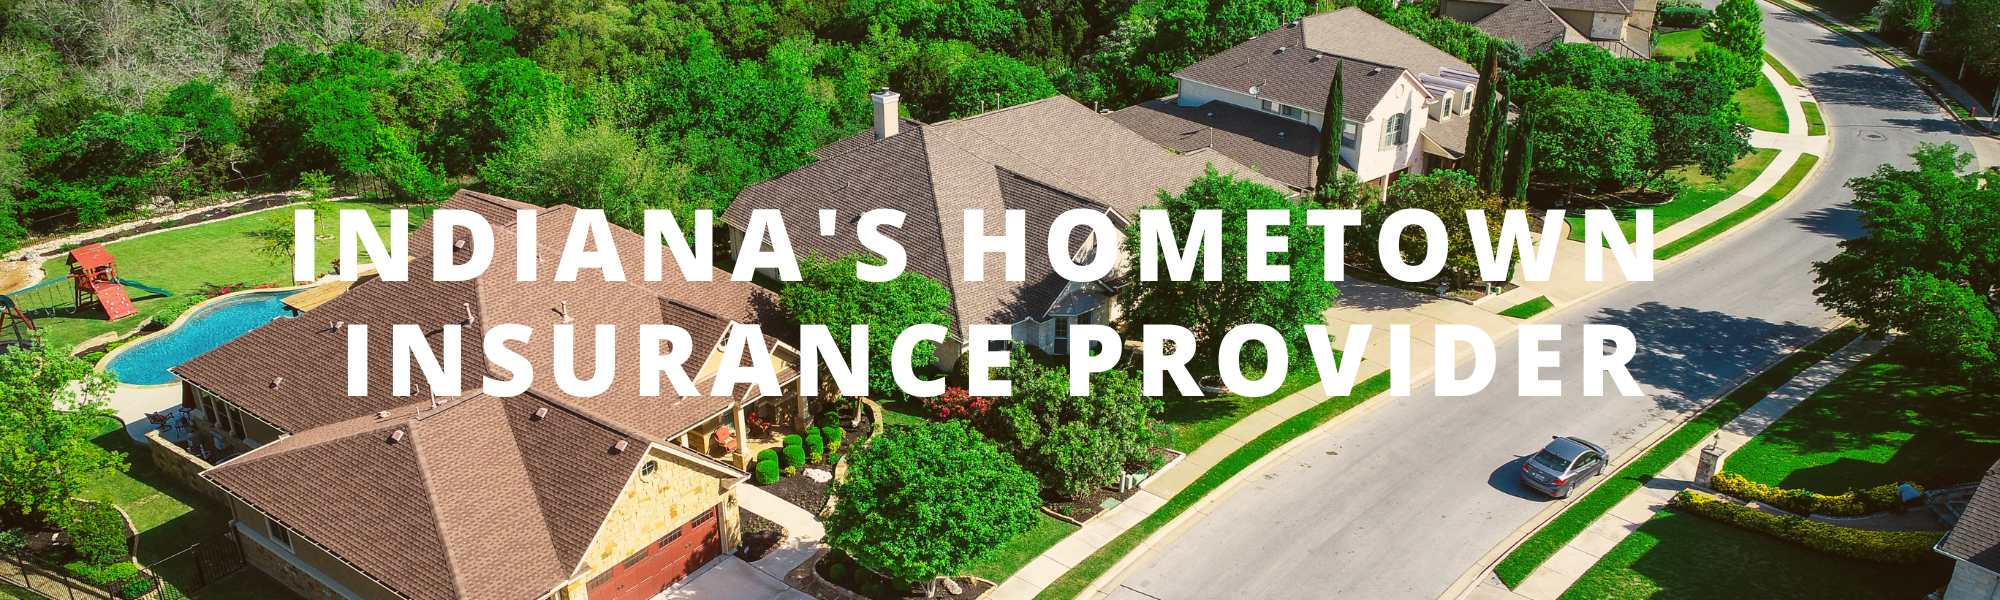 indianas hometown insurance provider (2000 × 600 px)